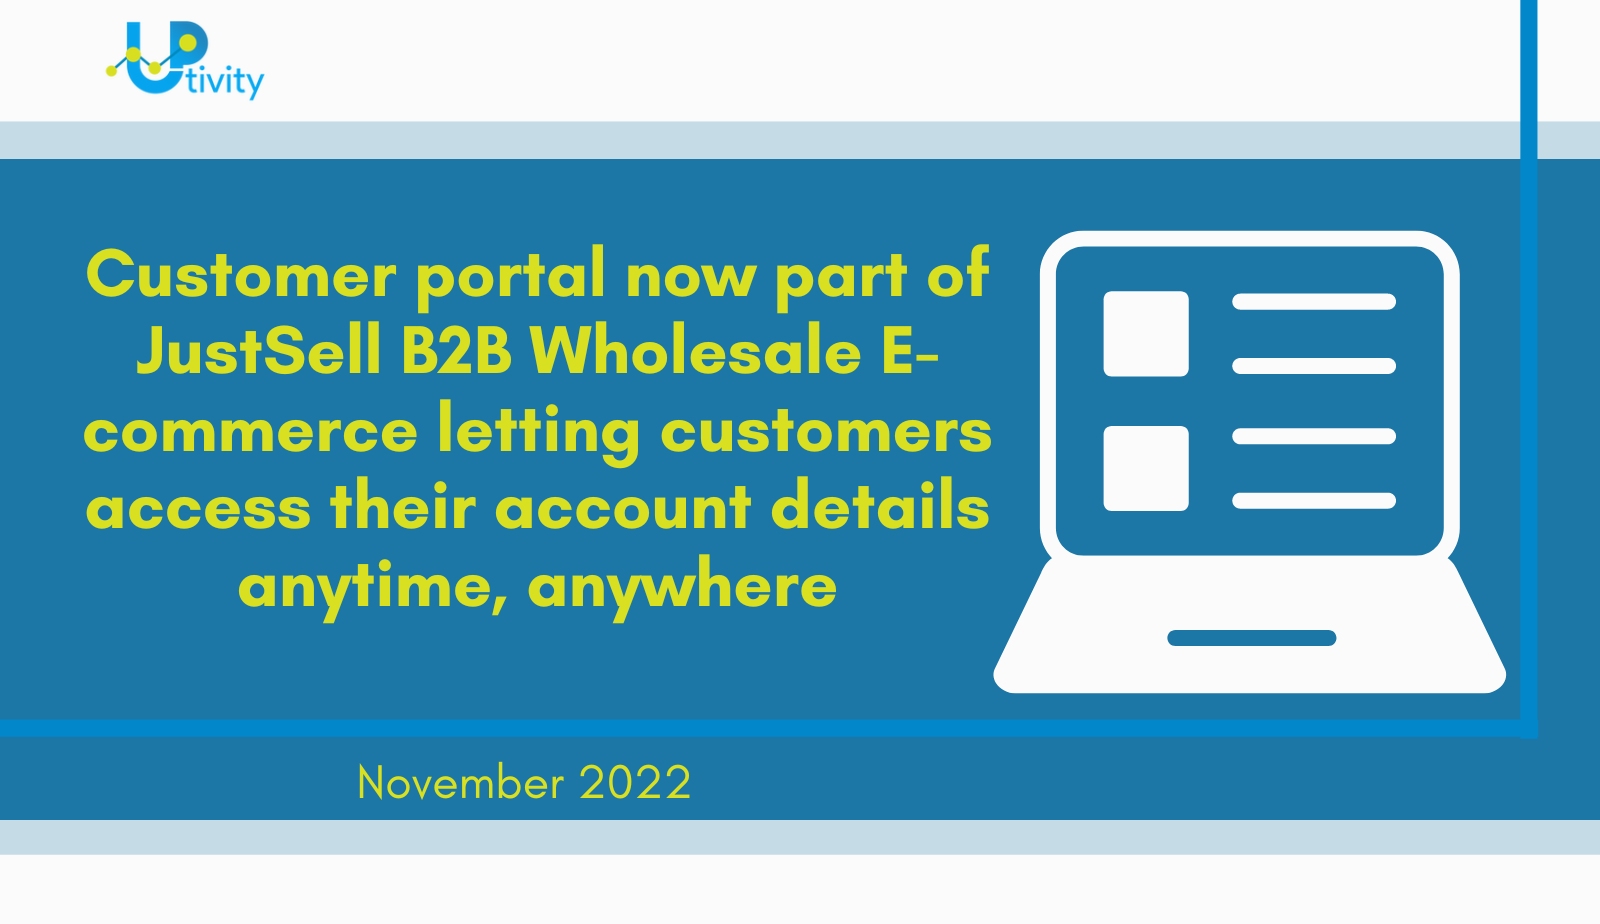 Customer portal now part of JustSell B2B Wholesale E-commerce letting customers access their account details anytime, anywhere